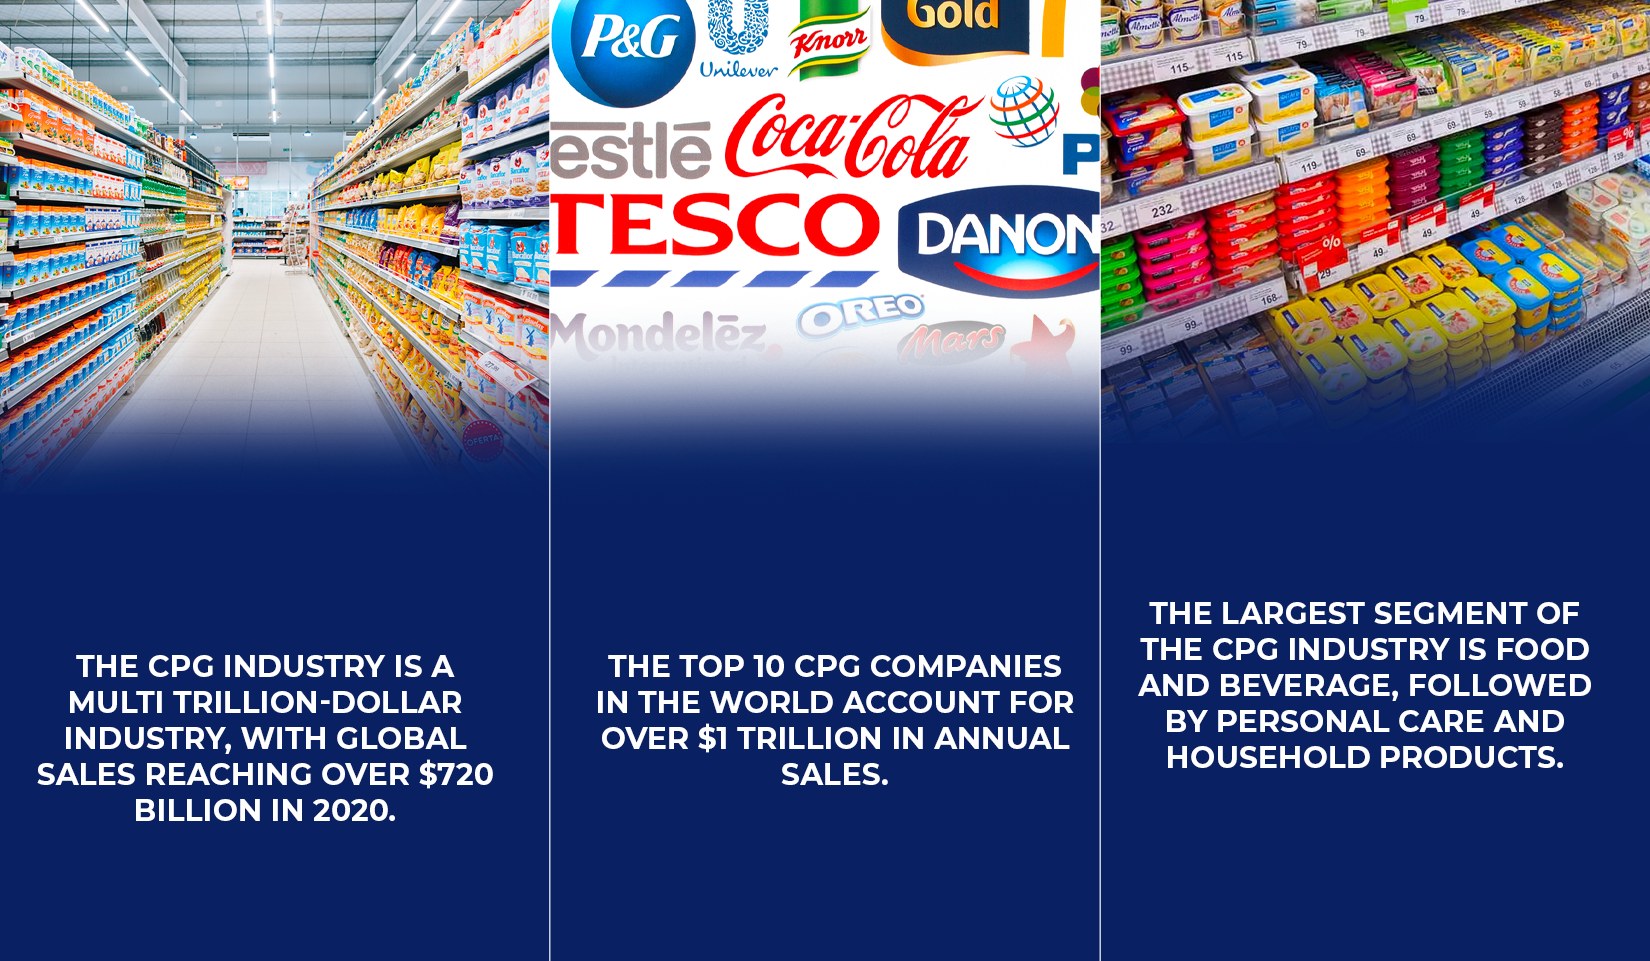 Did you know facts on the CPG industry